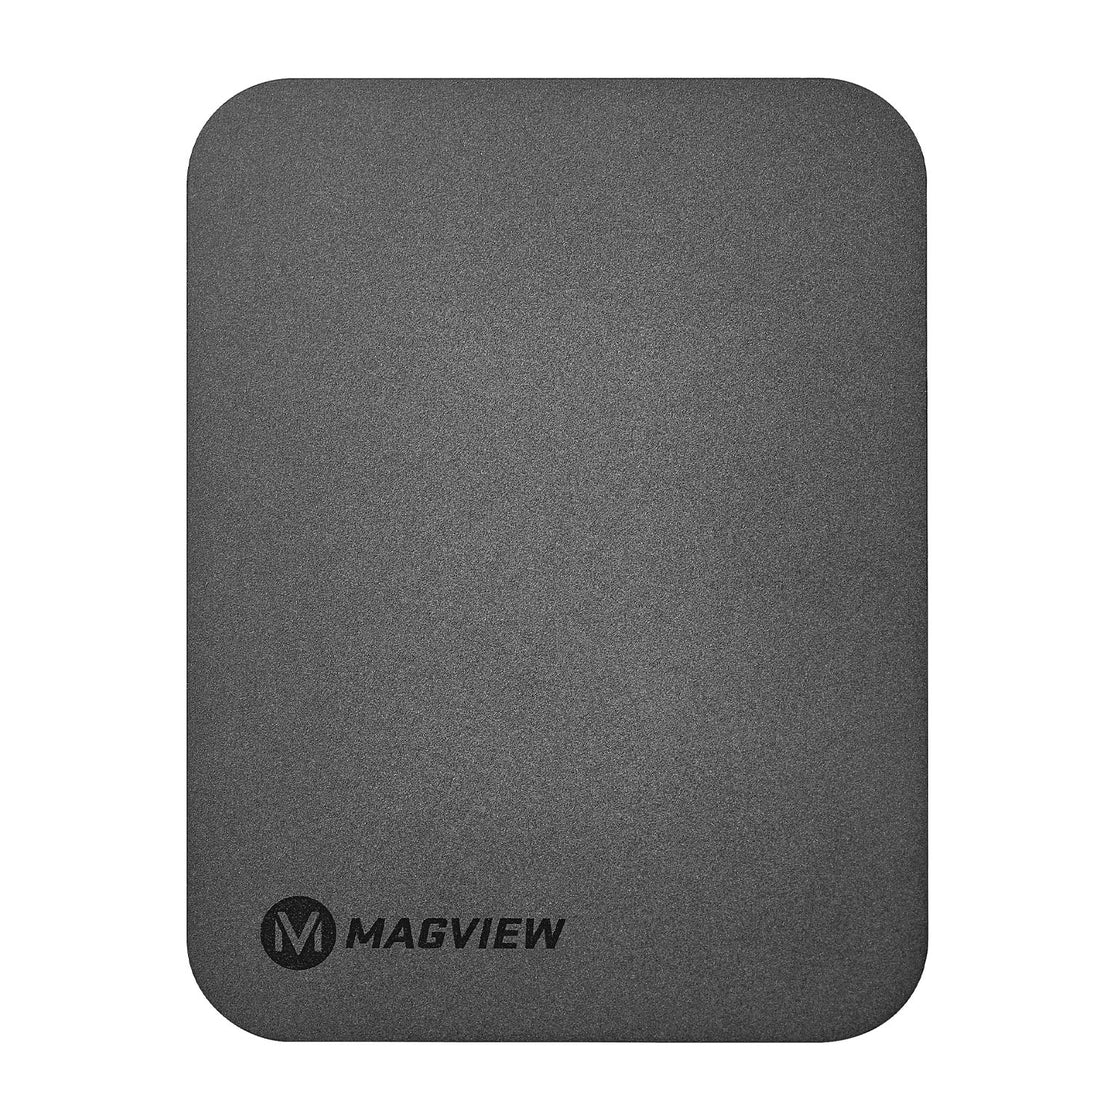 MAGVIEW PHONE PLATE - 3 Pack